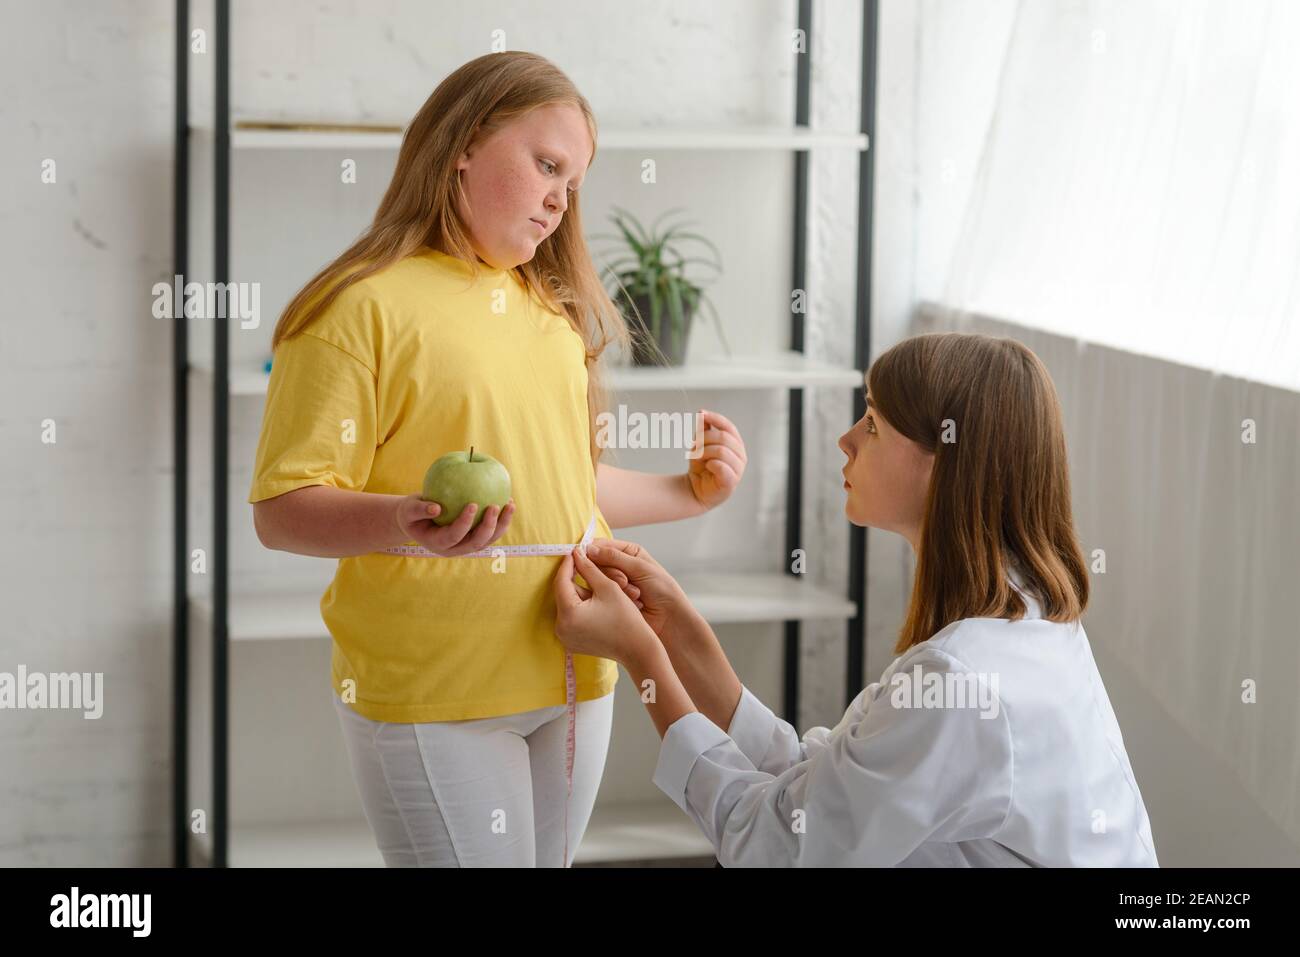 Nutritionist measuring obese girl's waist. Childhood obesity and weight loss Stock Photo